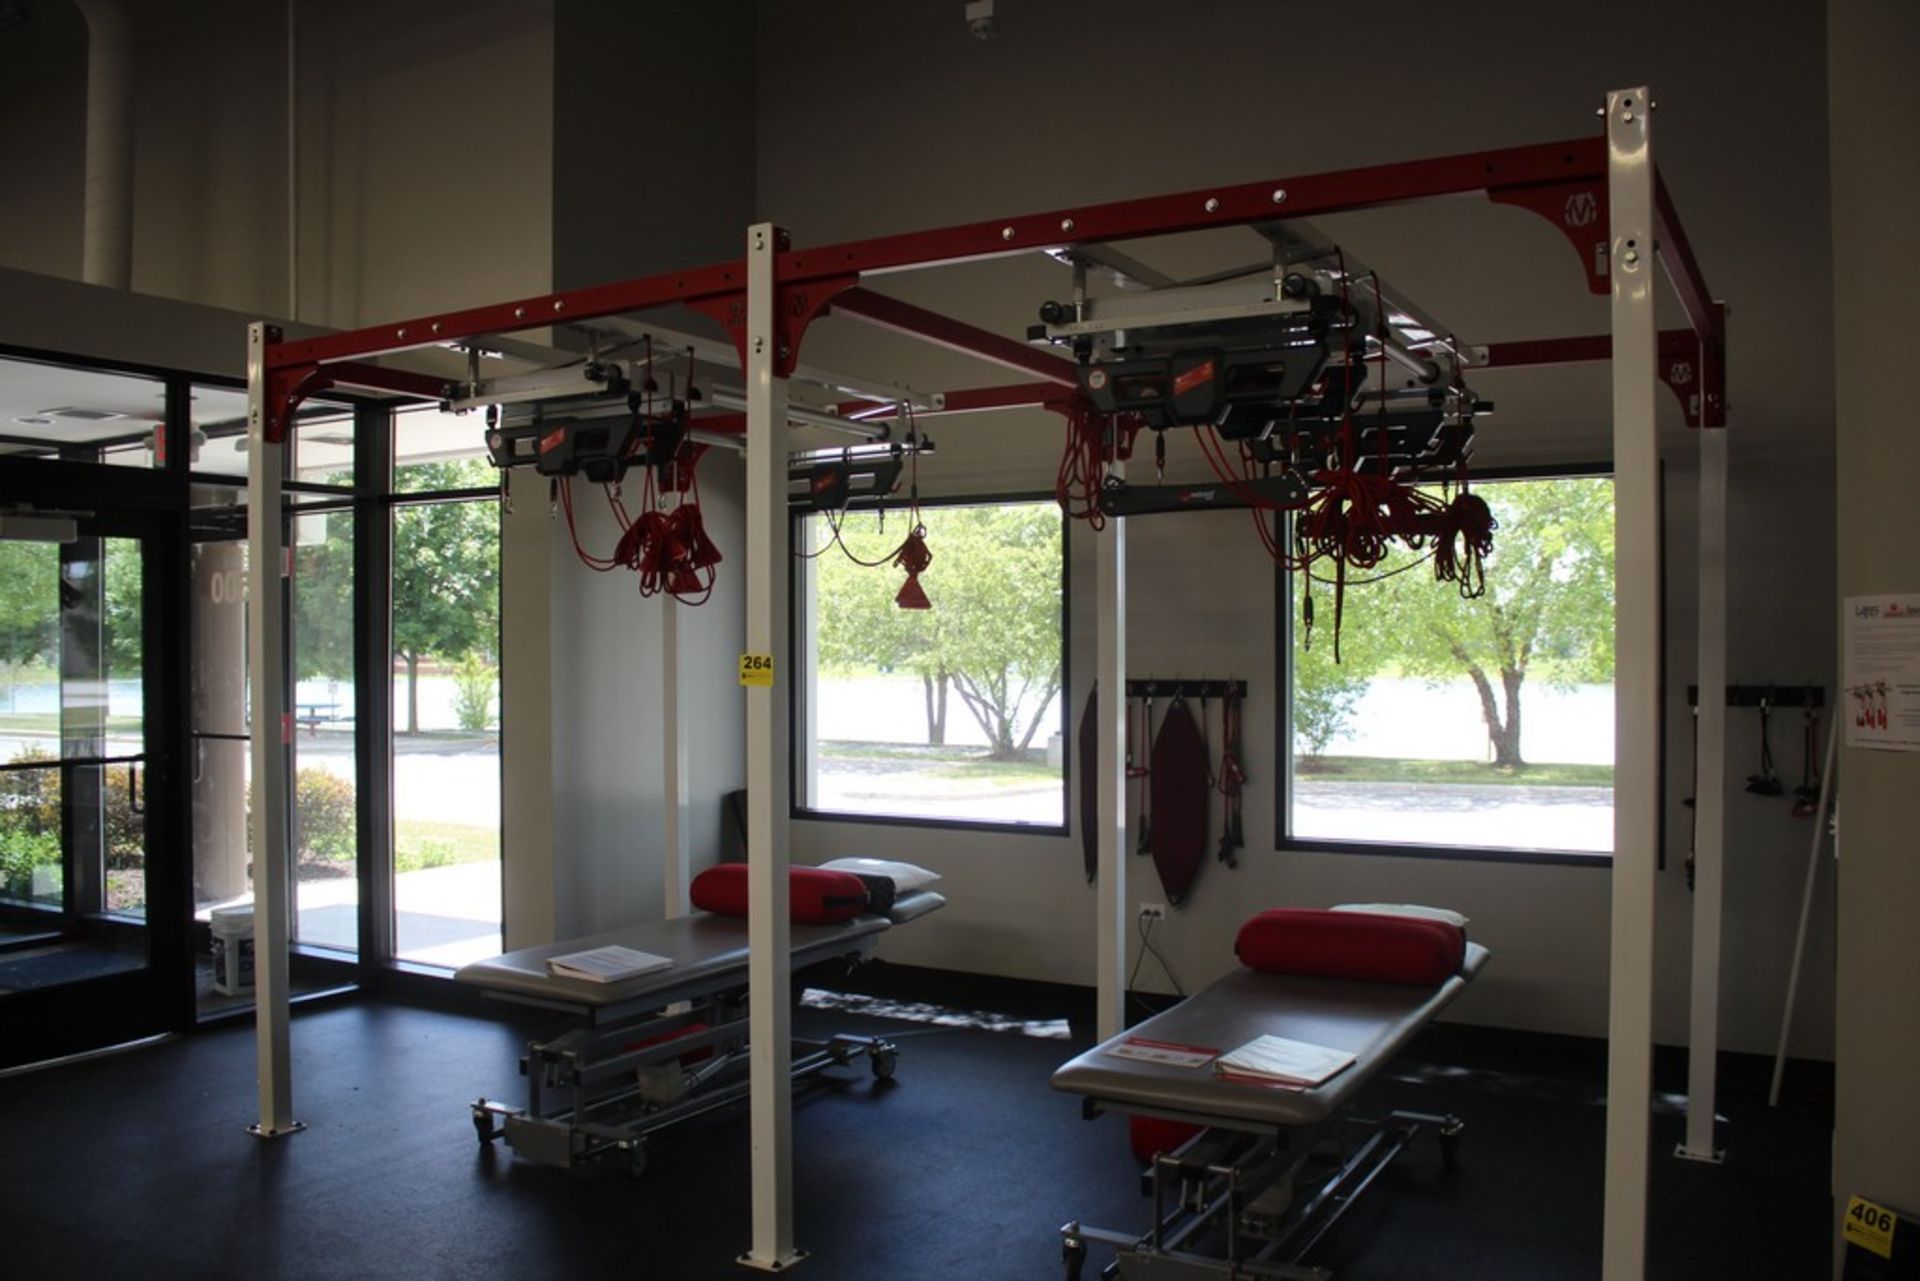 NEURAC DUAL RED CORD WORK STATION, INCLUDING AXIS AND TRAINER MODULES, MOUNTED TO MOVESTRONG FRAME